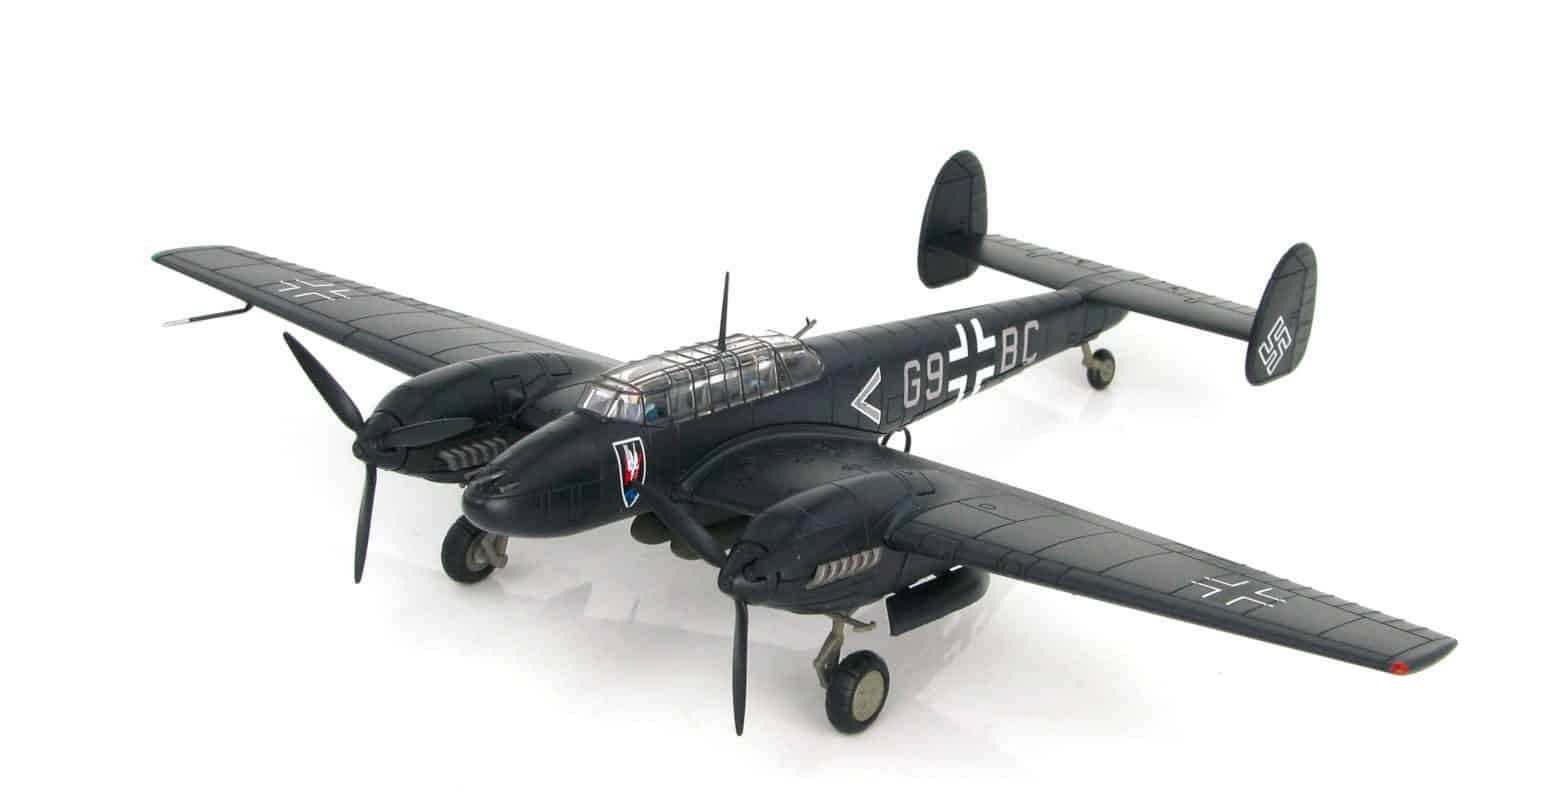 Front port side view of Hobby Master HA1814 - 1/72 scale diecast model Messerschmitt Bf 110E-2 with Geschwaderkennung G9+BC,  Pilot Oblt. Uellenbeck of II./N.JG 1 stationed in St Trond, France during 